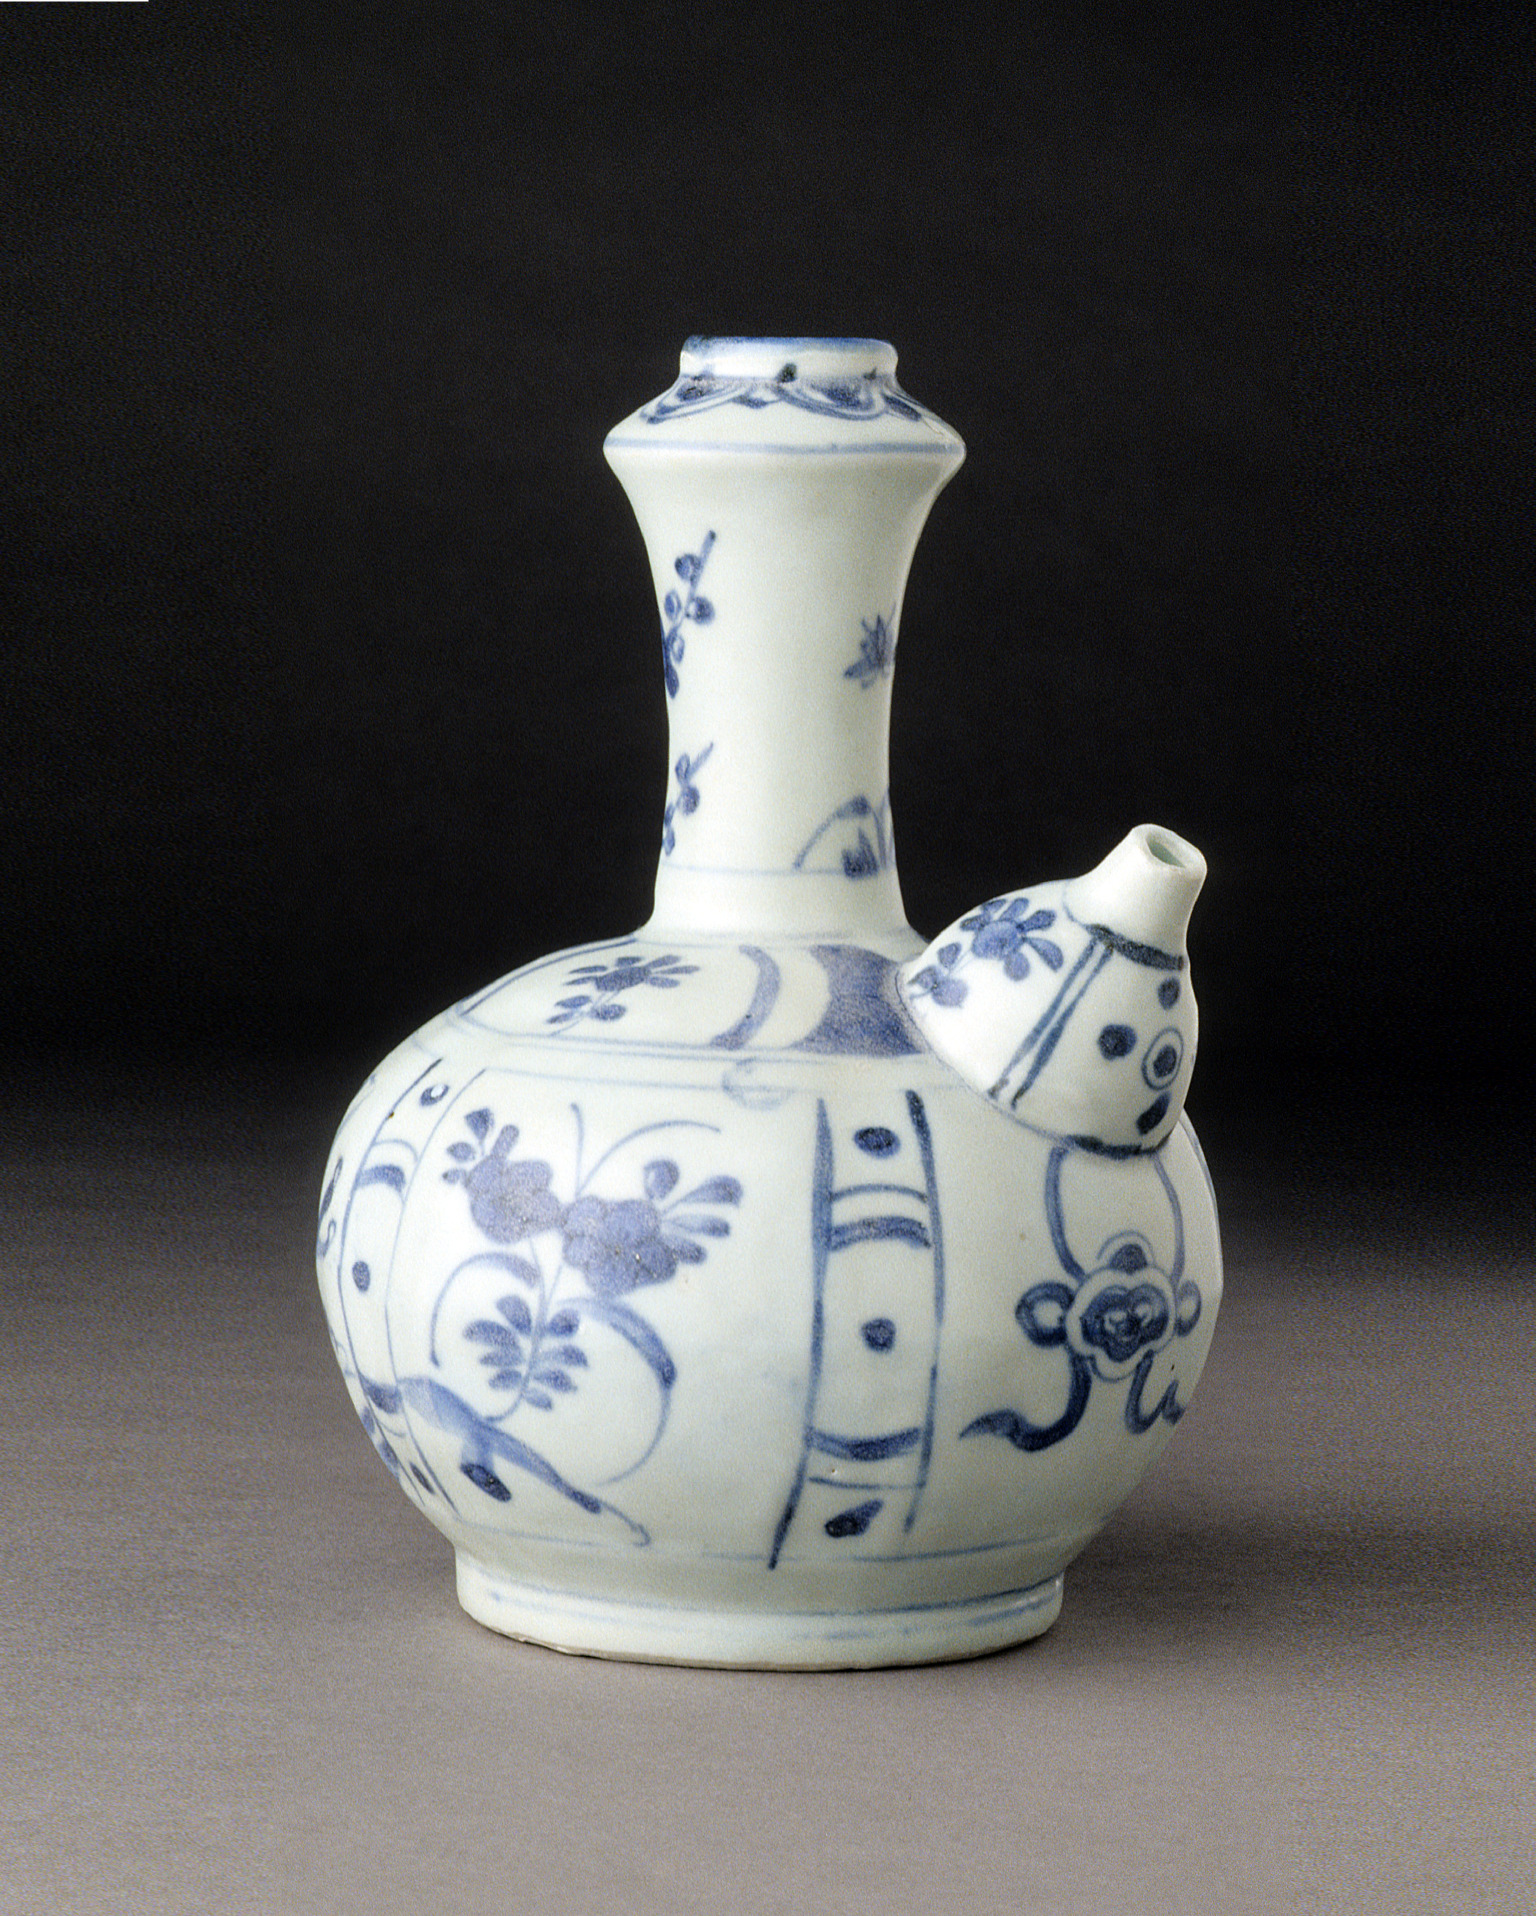 Kendi in the kraakporselein style, Porcelain (hard paste), China, 1635-45. Gift of Leo A. and Doris C. Hodroff 2000.0061.076